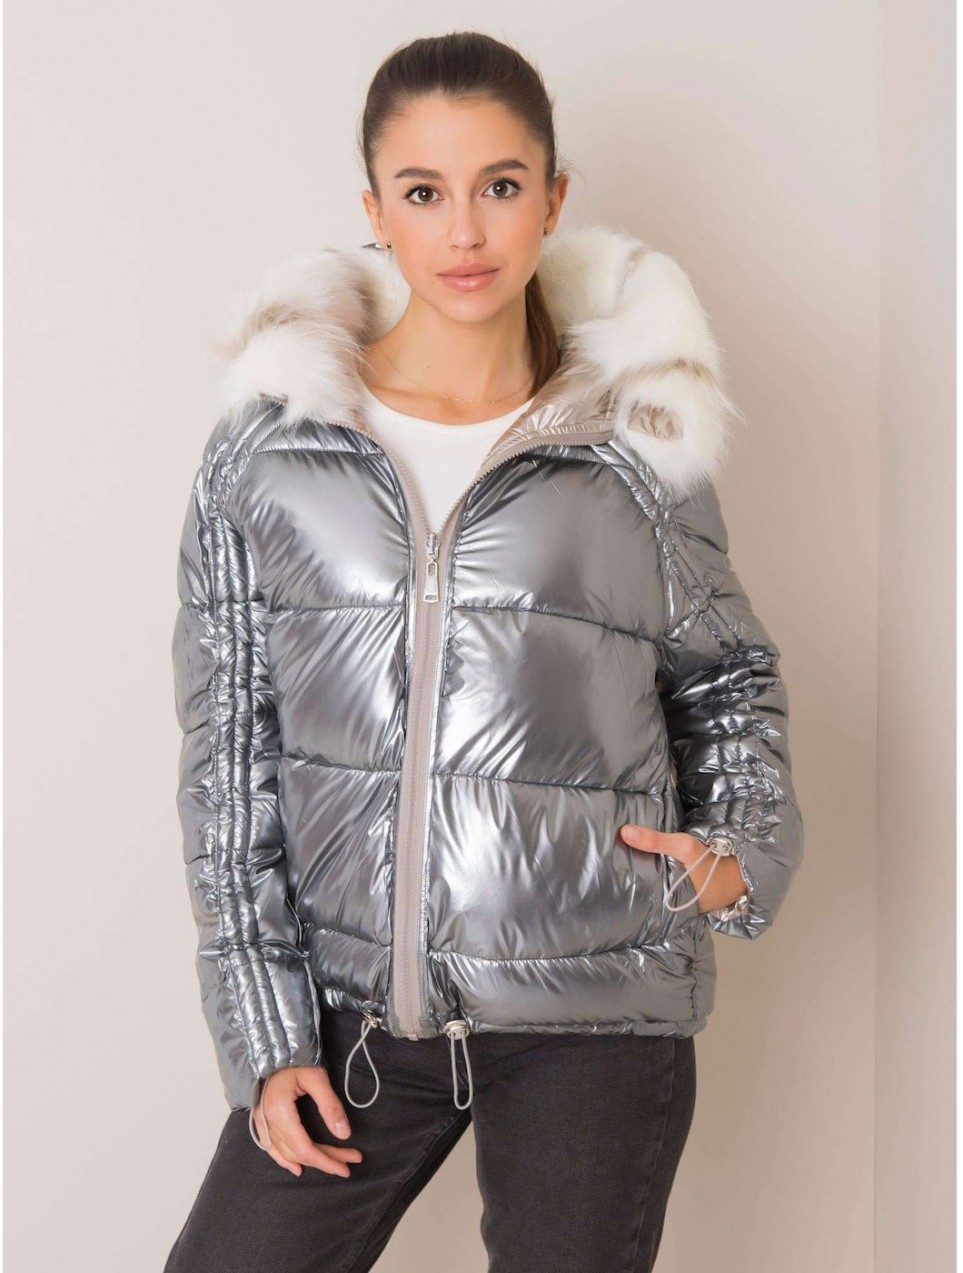 Beige and silver reversible winter jacket with fur